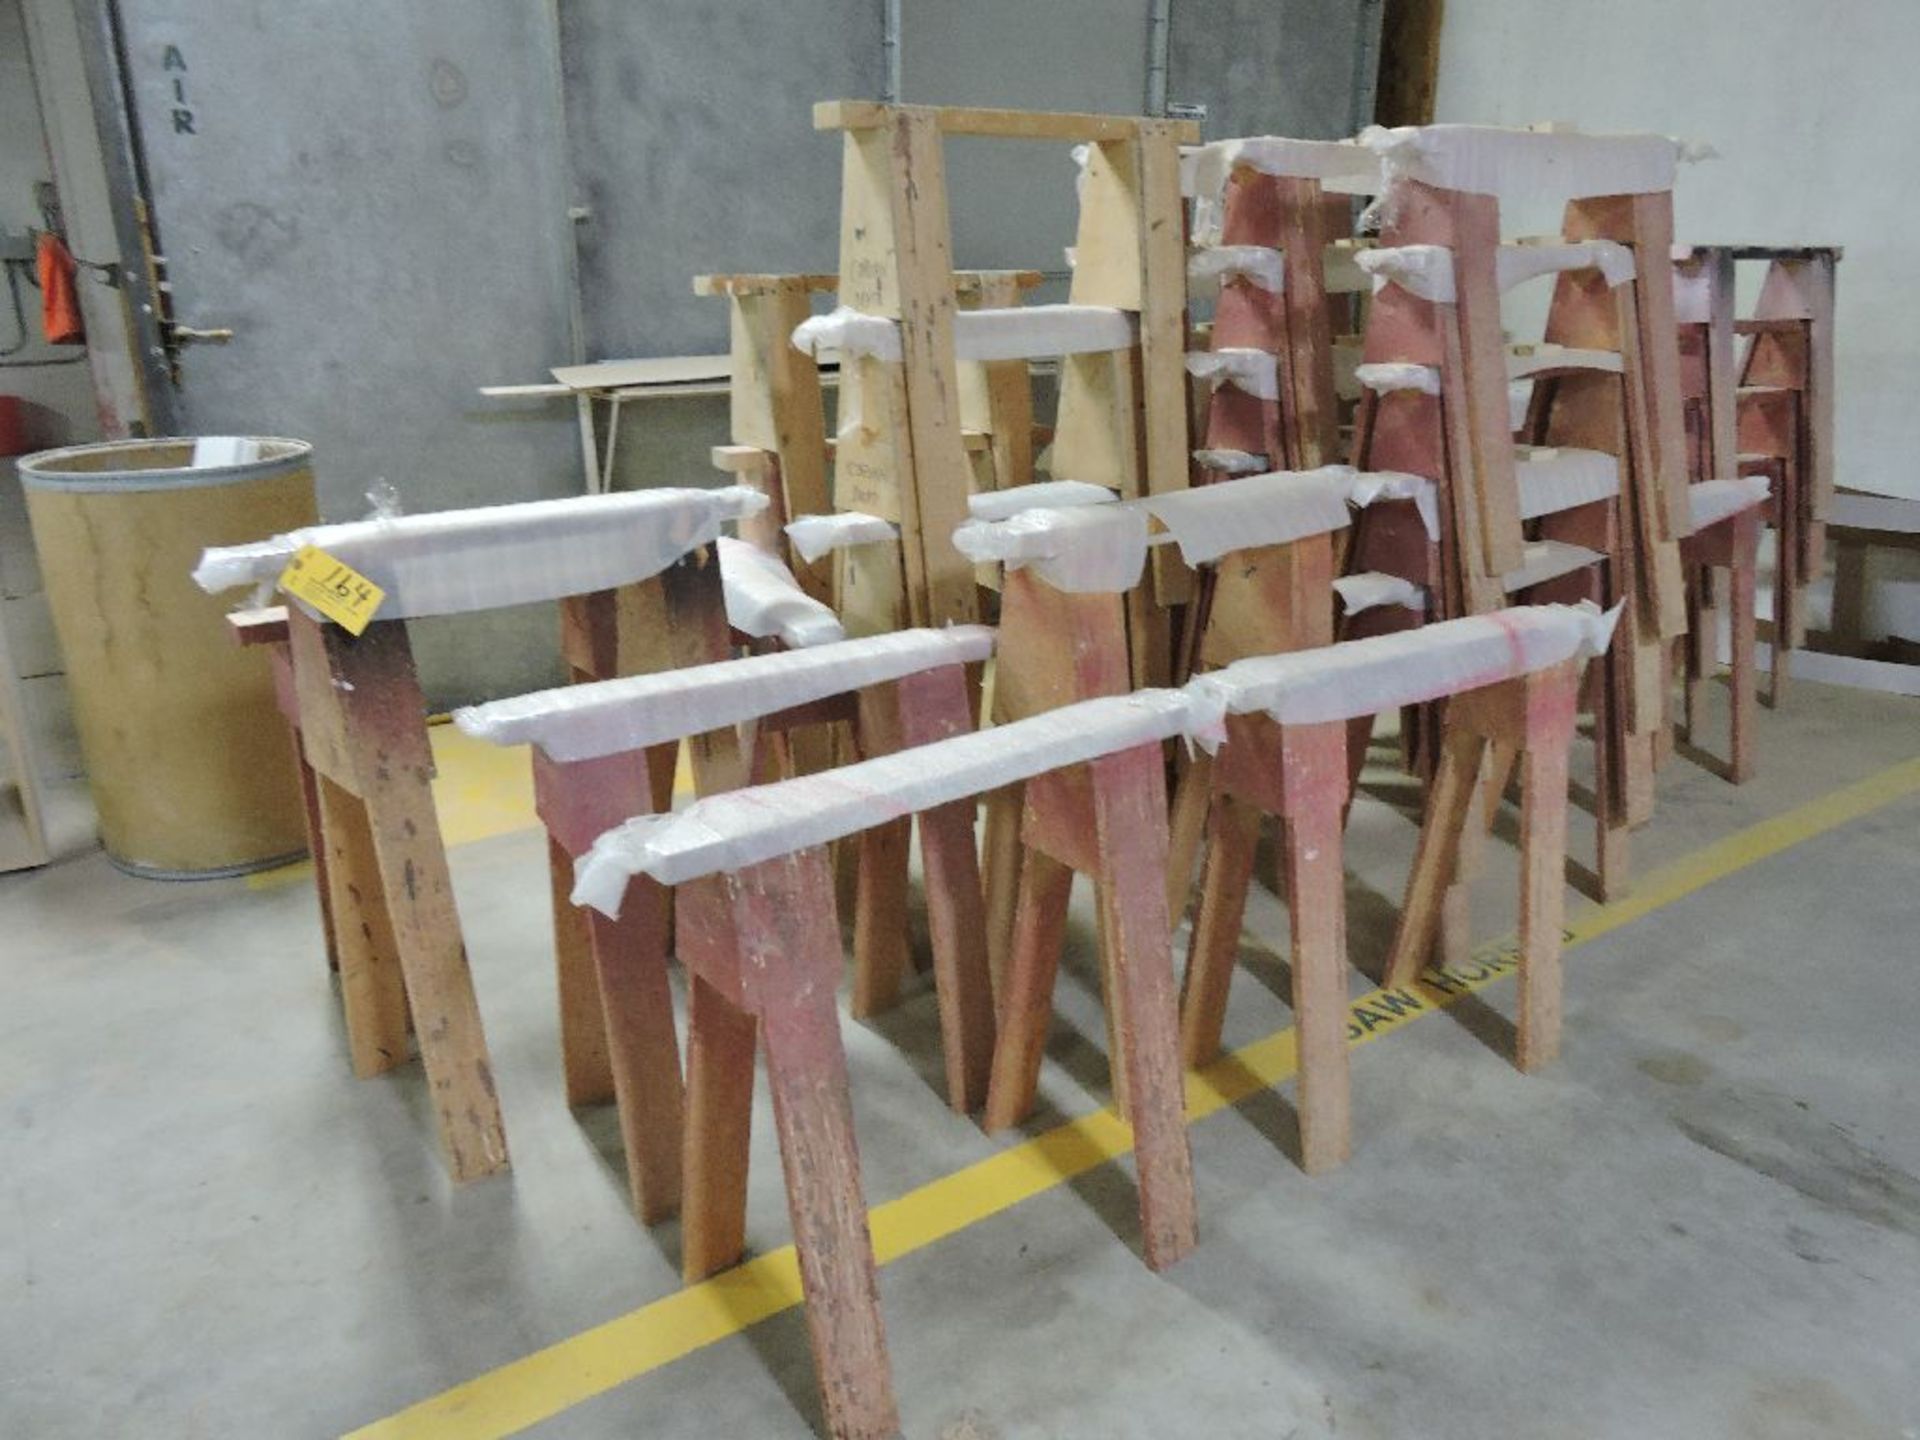 Wooden saw horses.